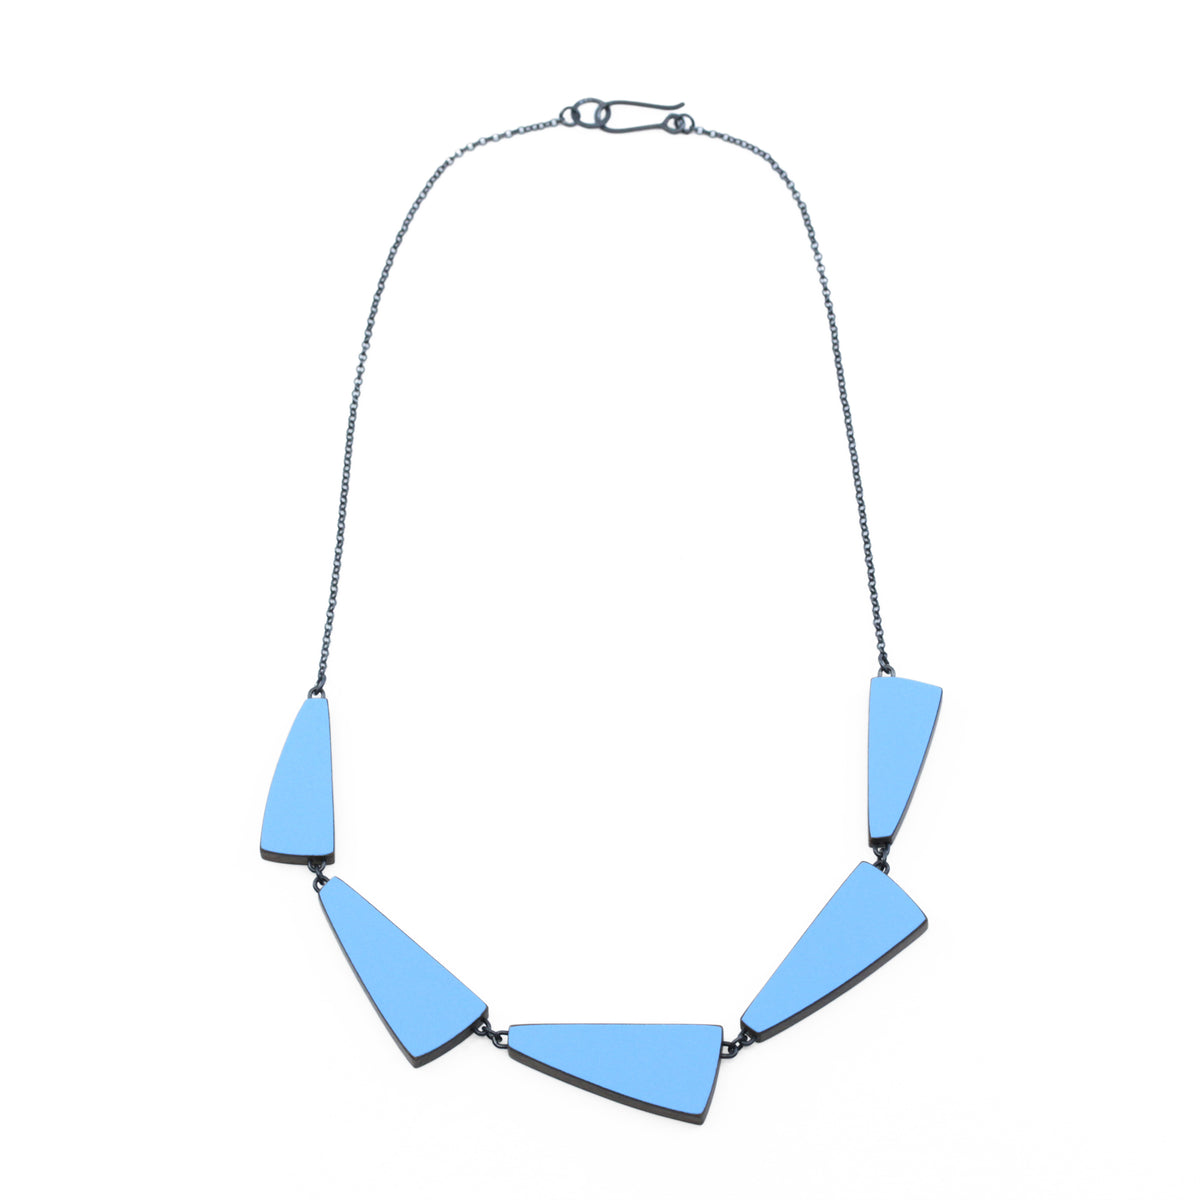 Five part wing necklace (reversible) - grass green and blue